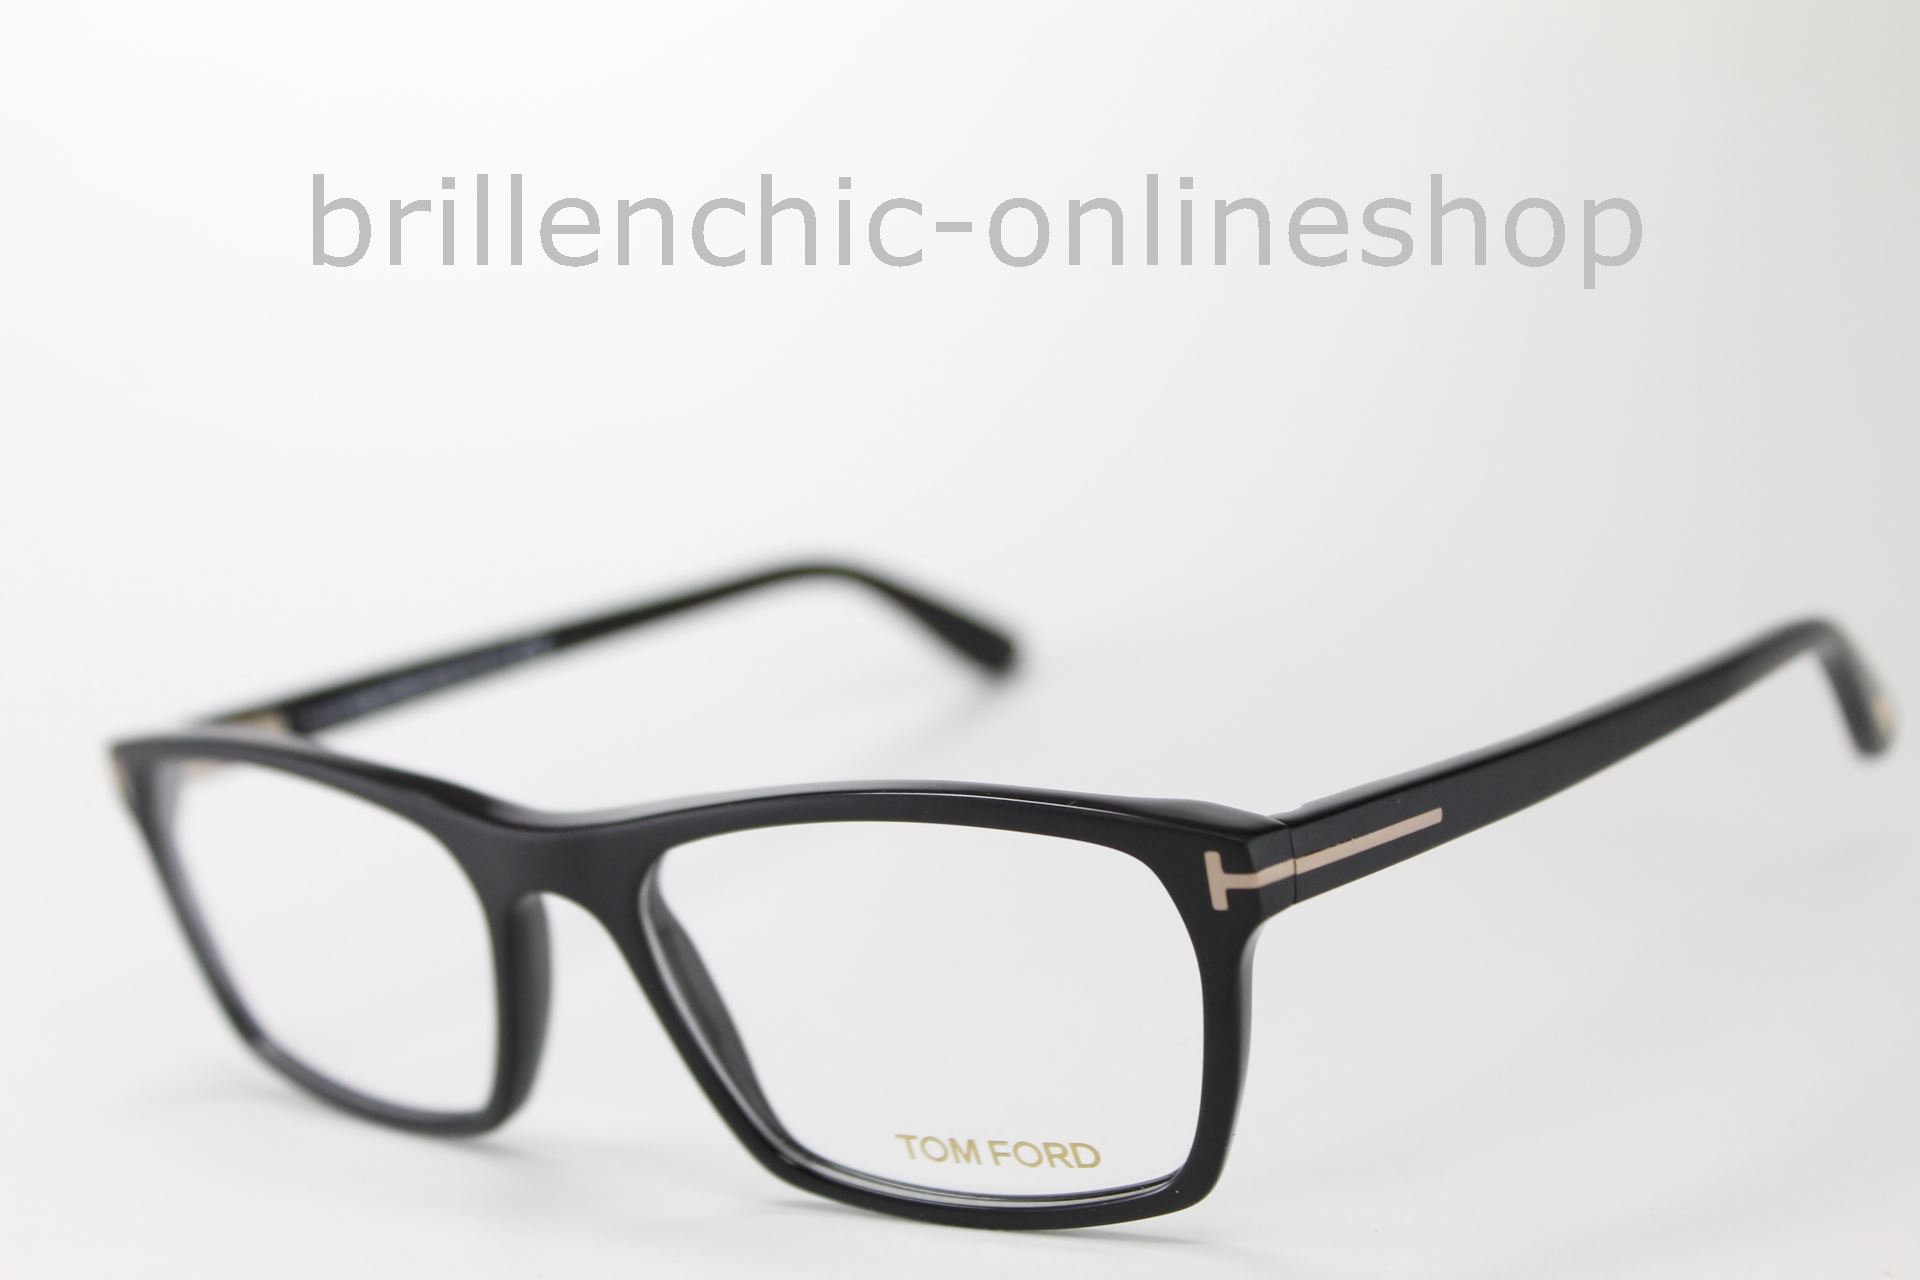 Brillenchic-onlineshop in Berlin - TOM FORD TF 5295 002 